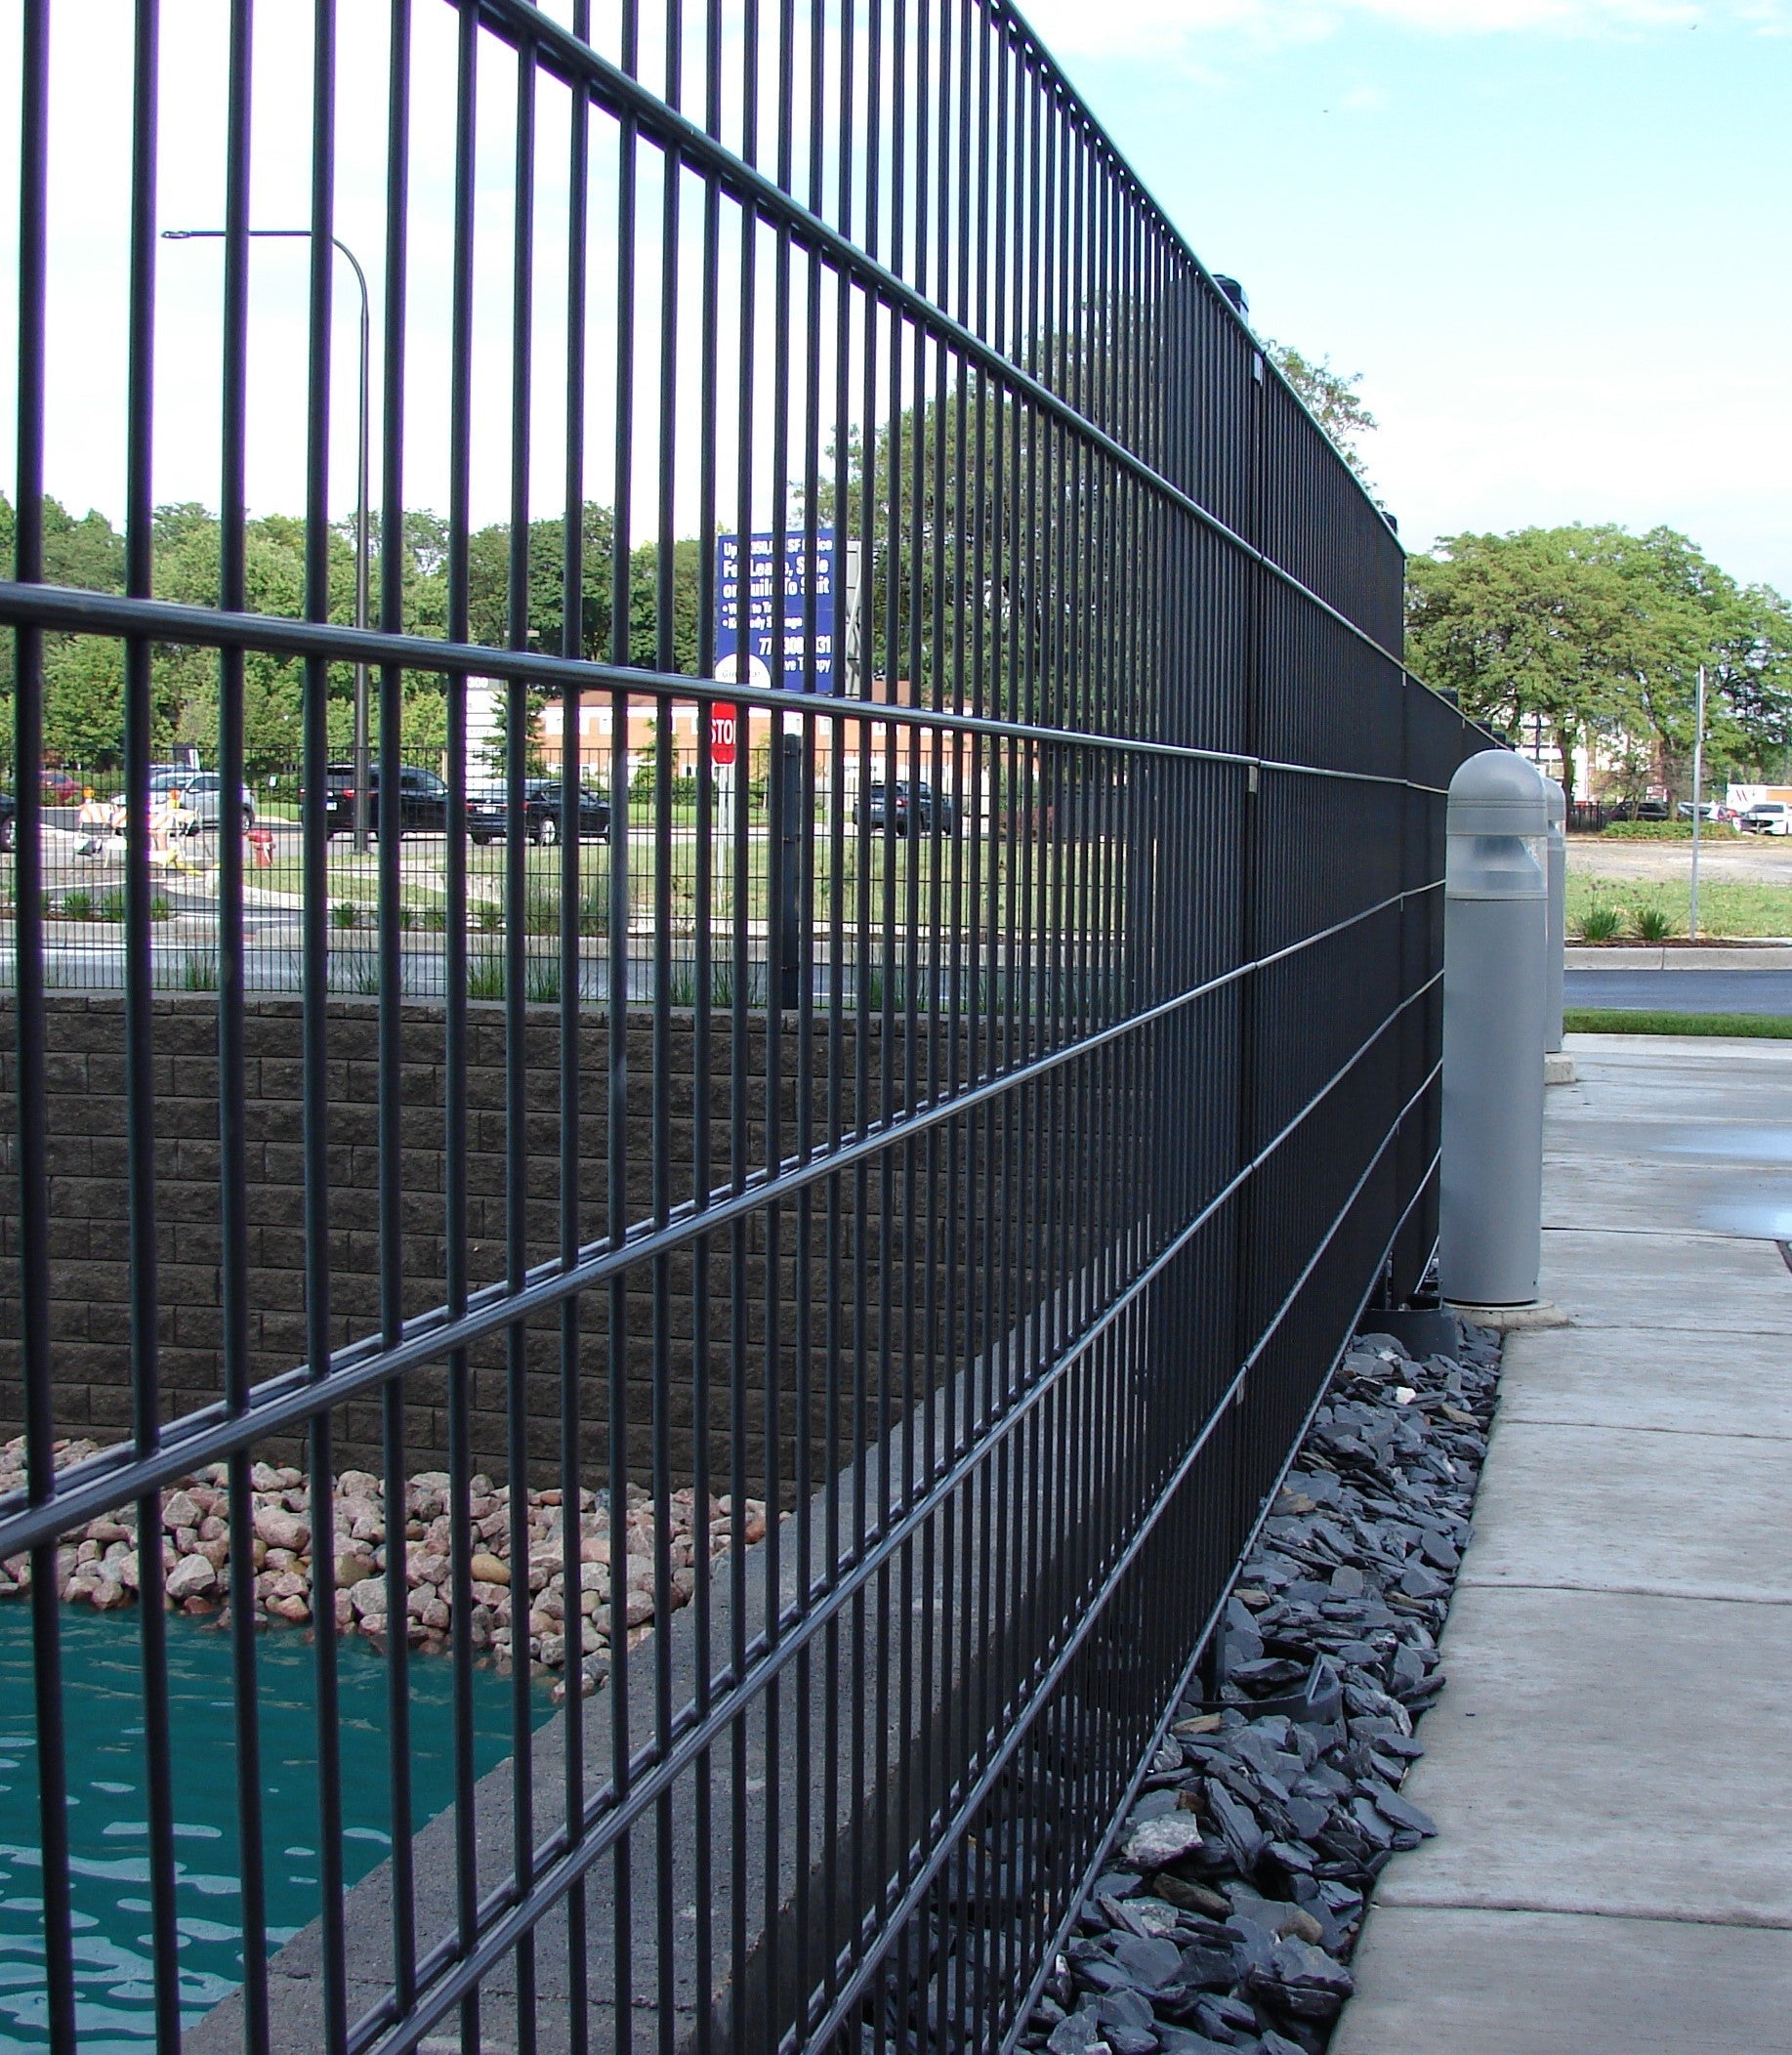 Double Wire 868 Fence Panels | Betafence